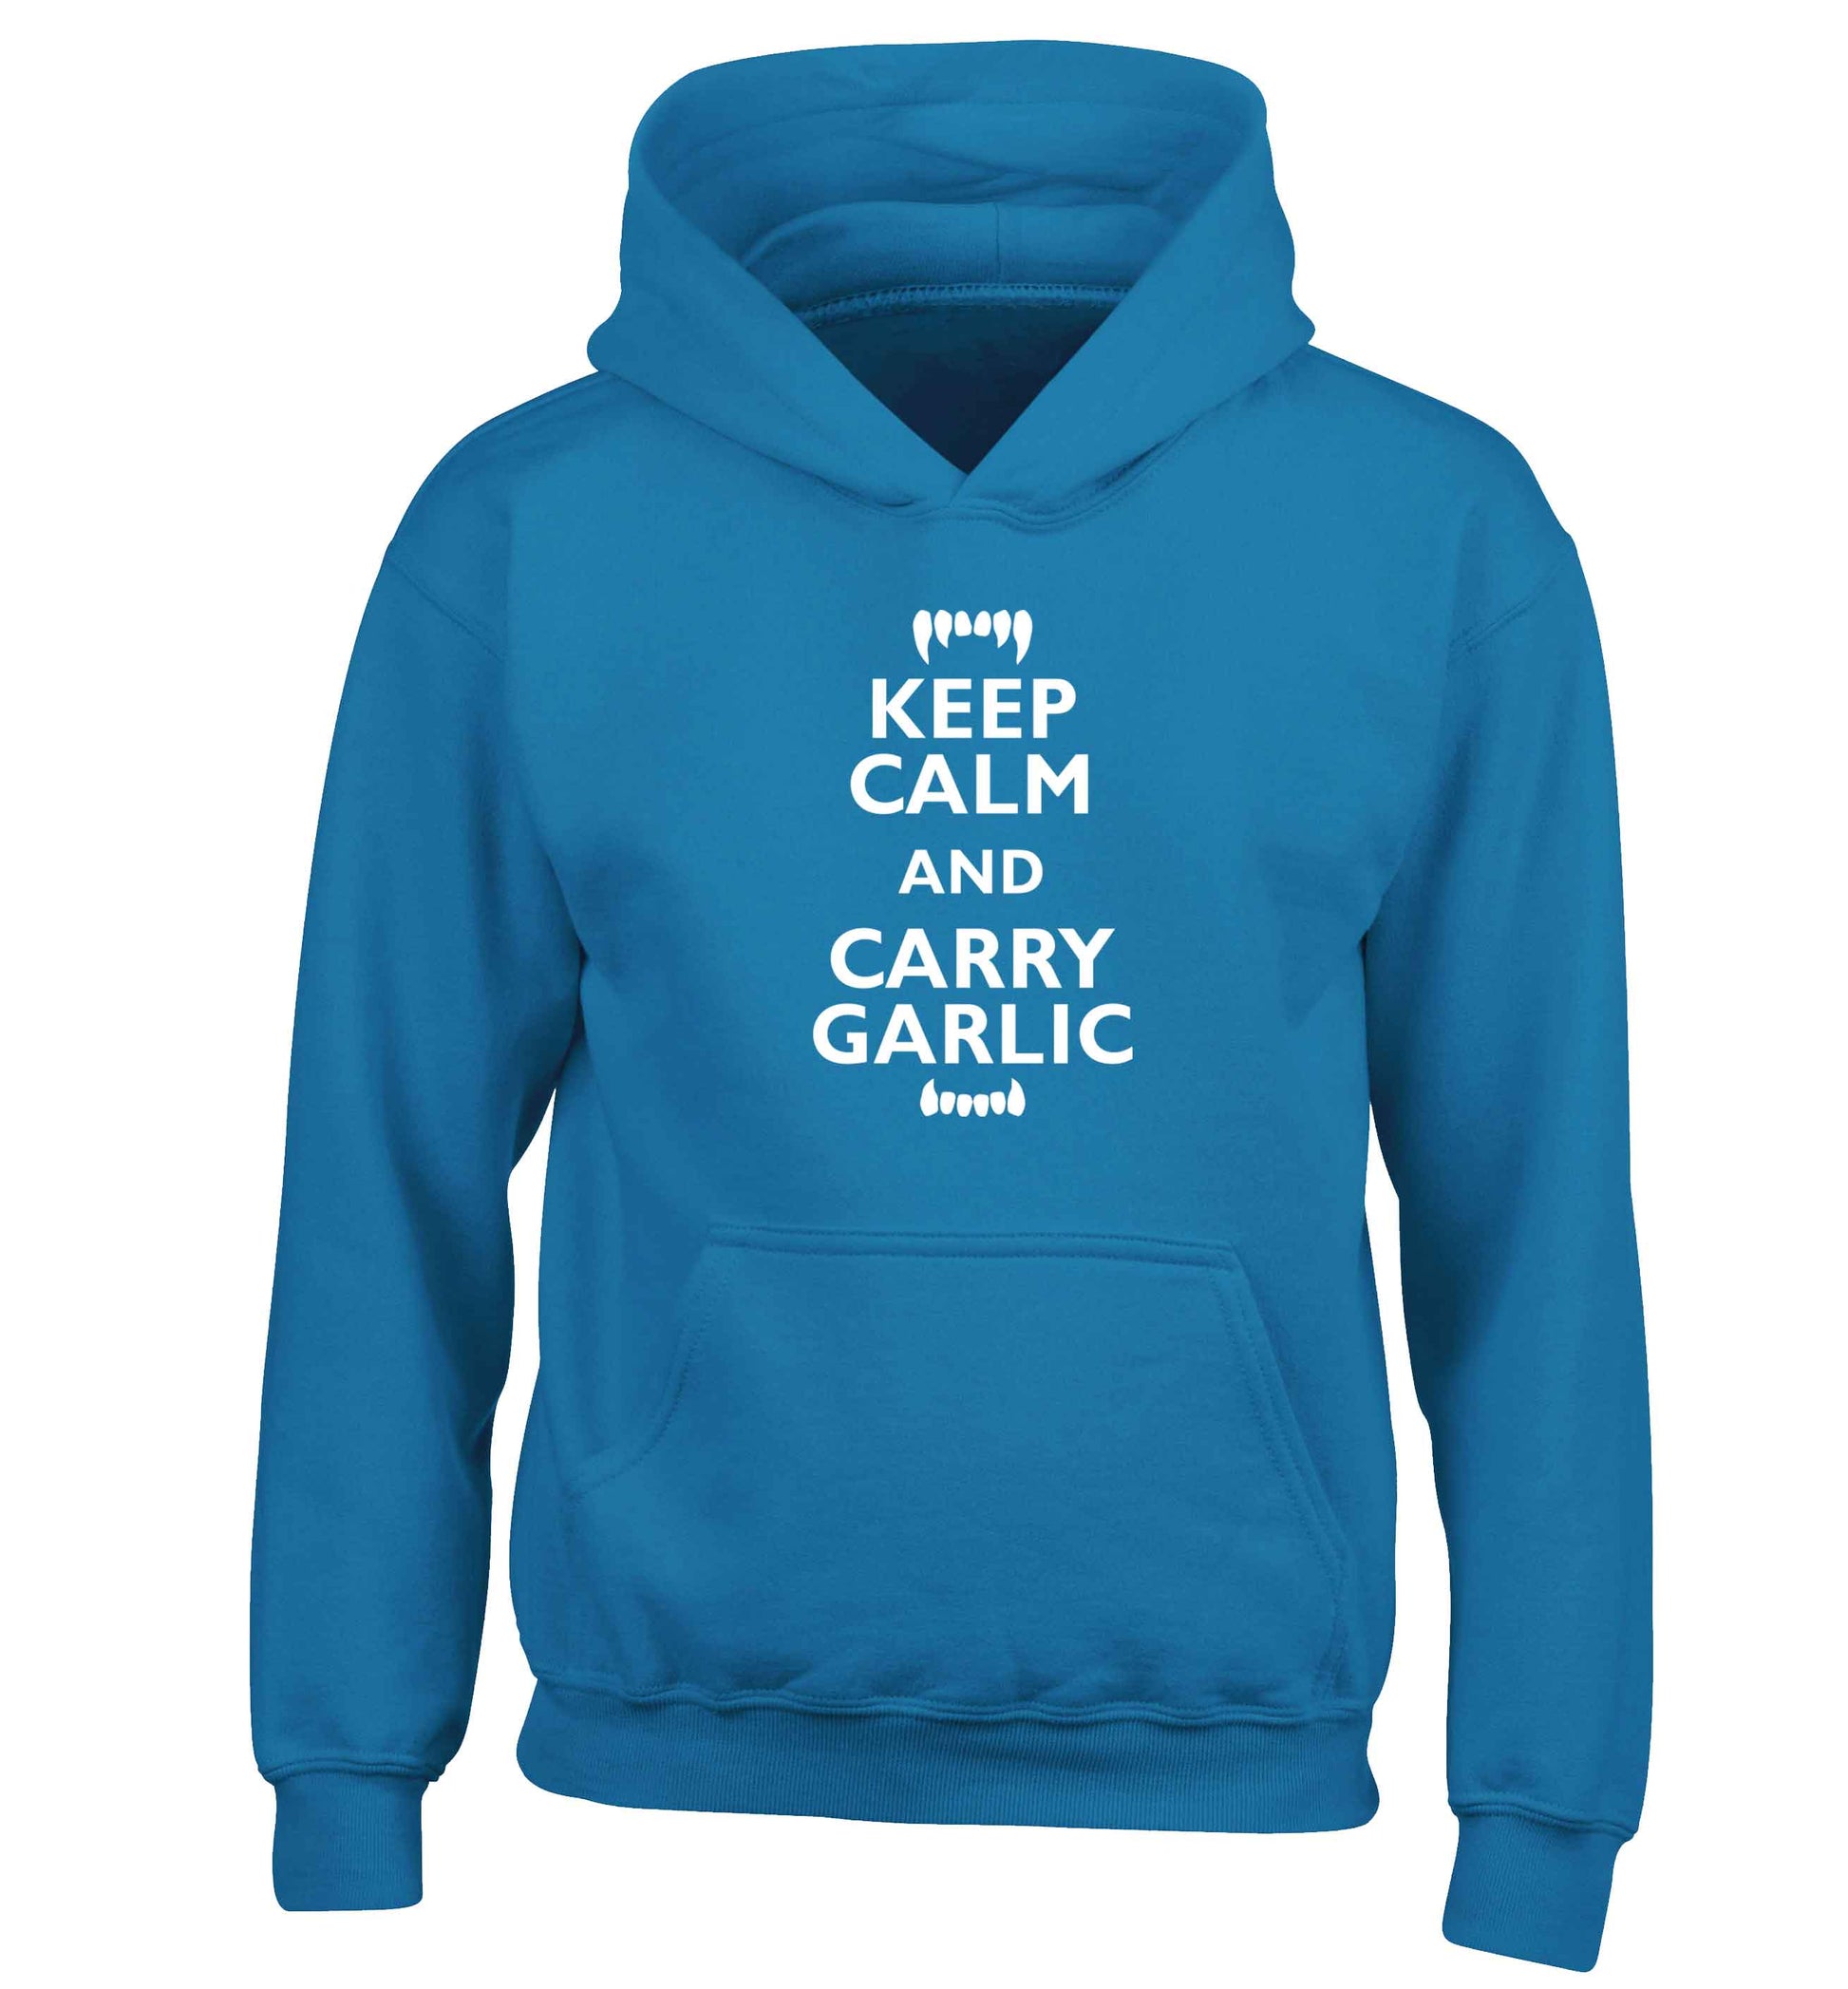 Keep calm and carry garlic children's blue hoodie 12-13 Years